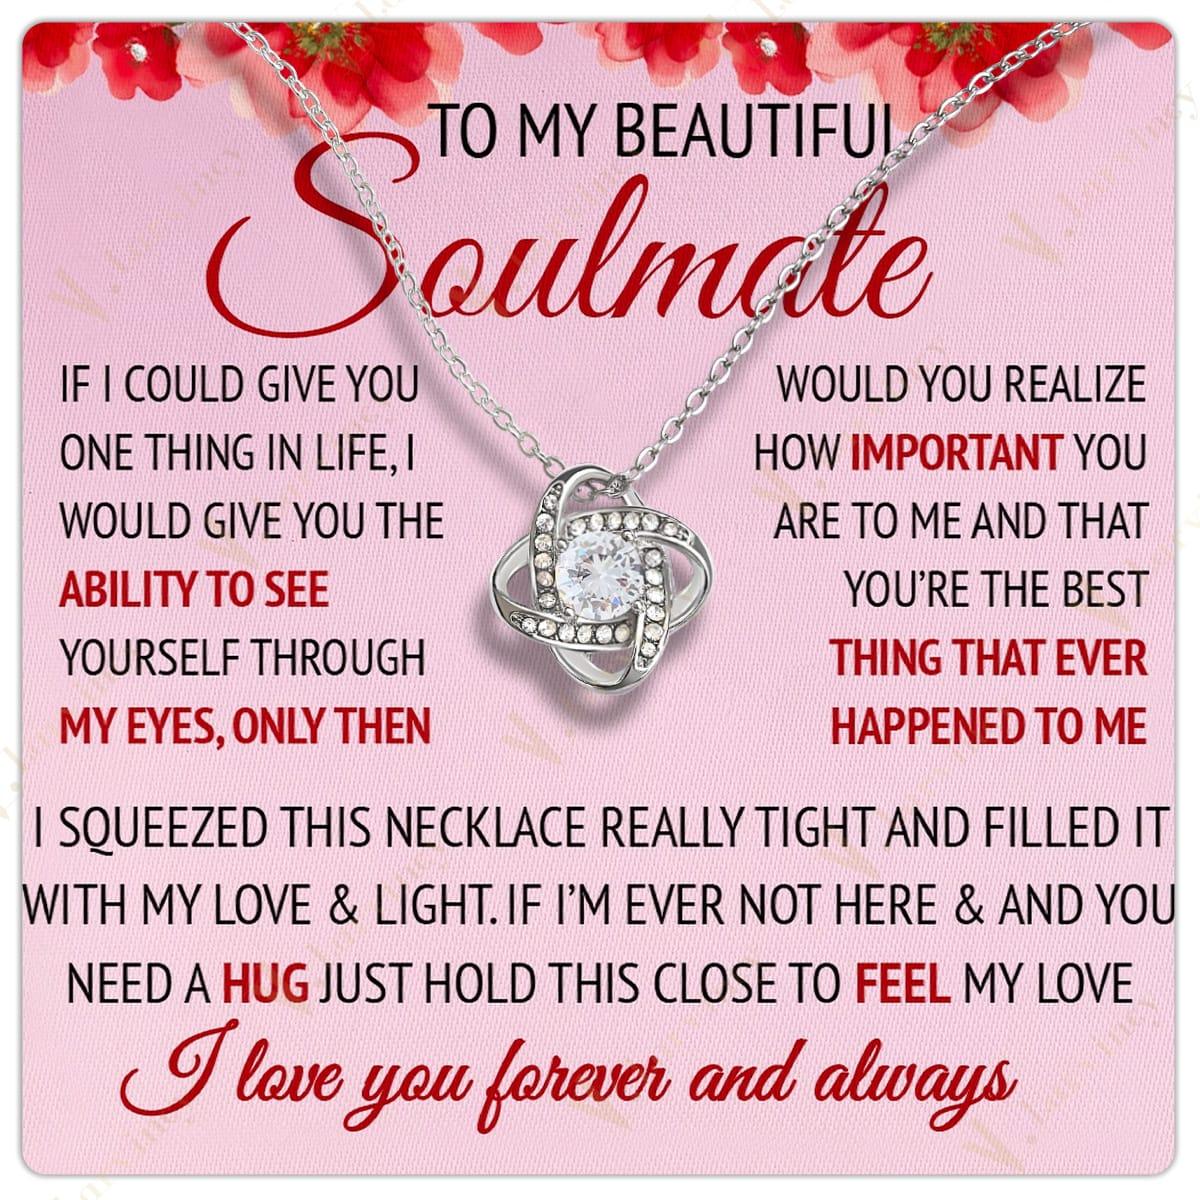 To My Soulmate Necklace, Jewelry Gift For Wife From Husband, Birthday Gift, Wedding Anniversary Gifts For Wife With Gift Box Personalized Message Card, Flower Red - Larvincy Jewel